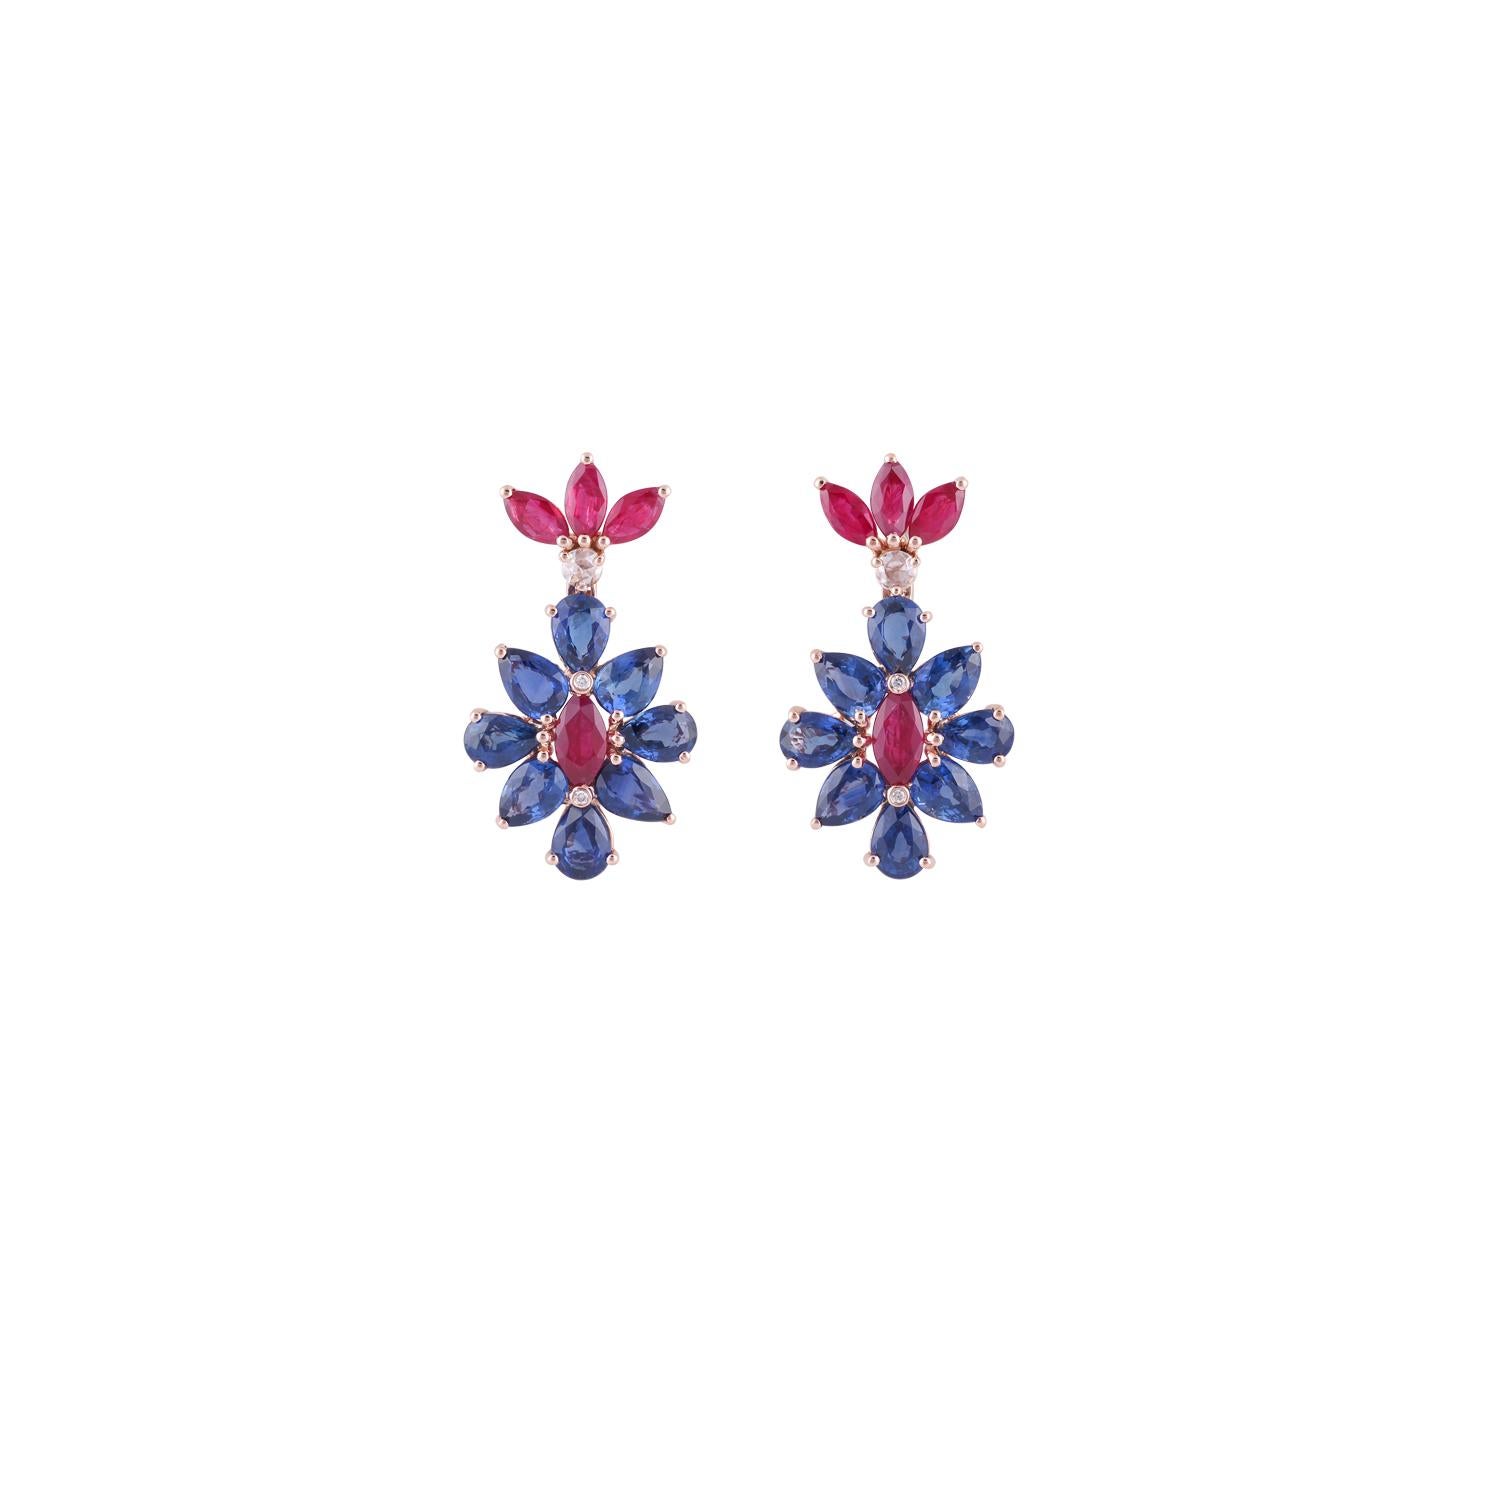 This is an exclusive pair of blue sapphire, ruby & diamond earrings studded in 18k rose gold features 16 pieces of pear shaped blue sapphire weight 7.84 carats with 8 pieces of marquise shaped ruby weight 2.46 carat & round shaped diamonds weight